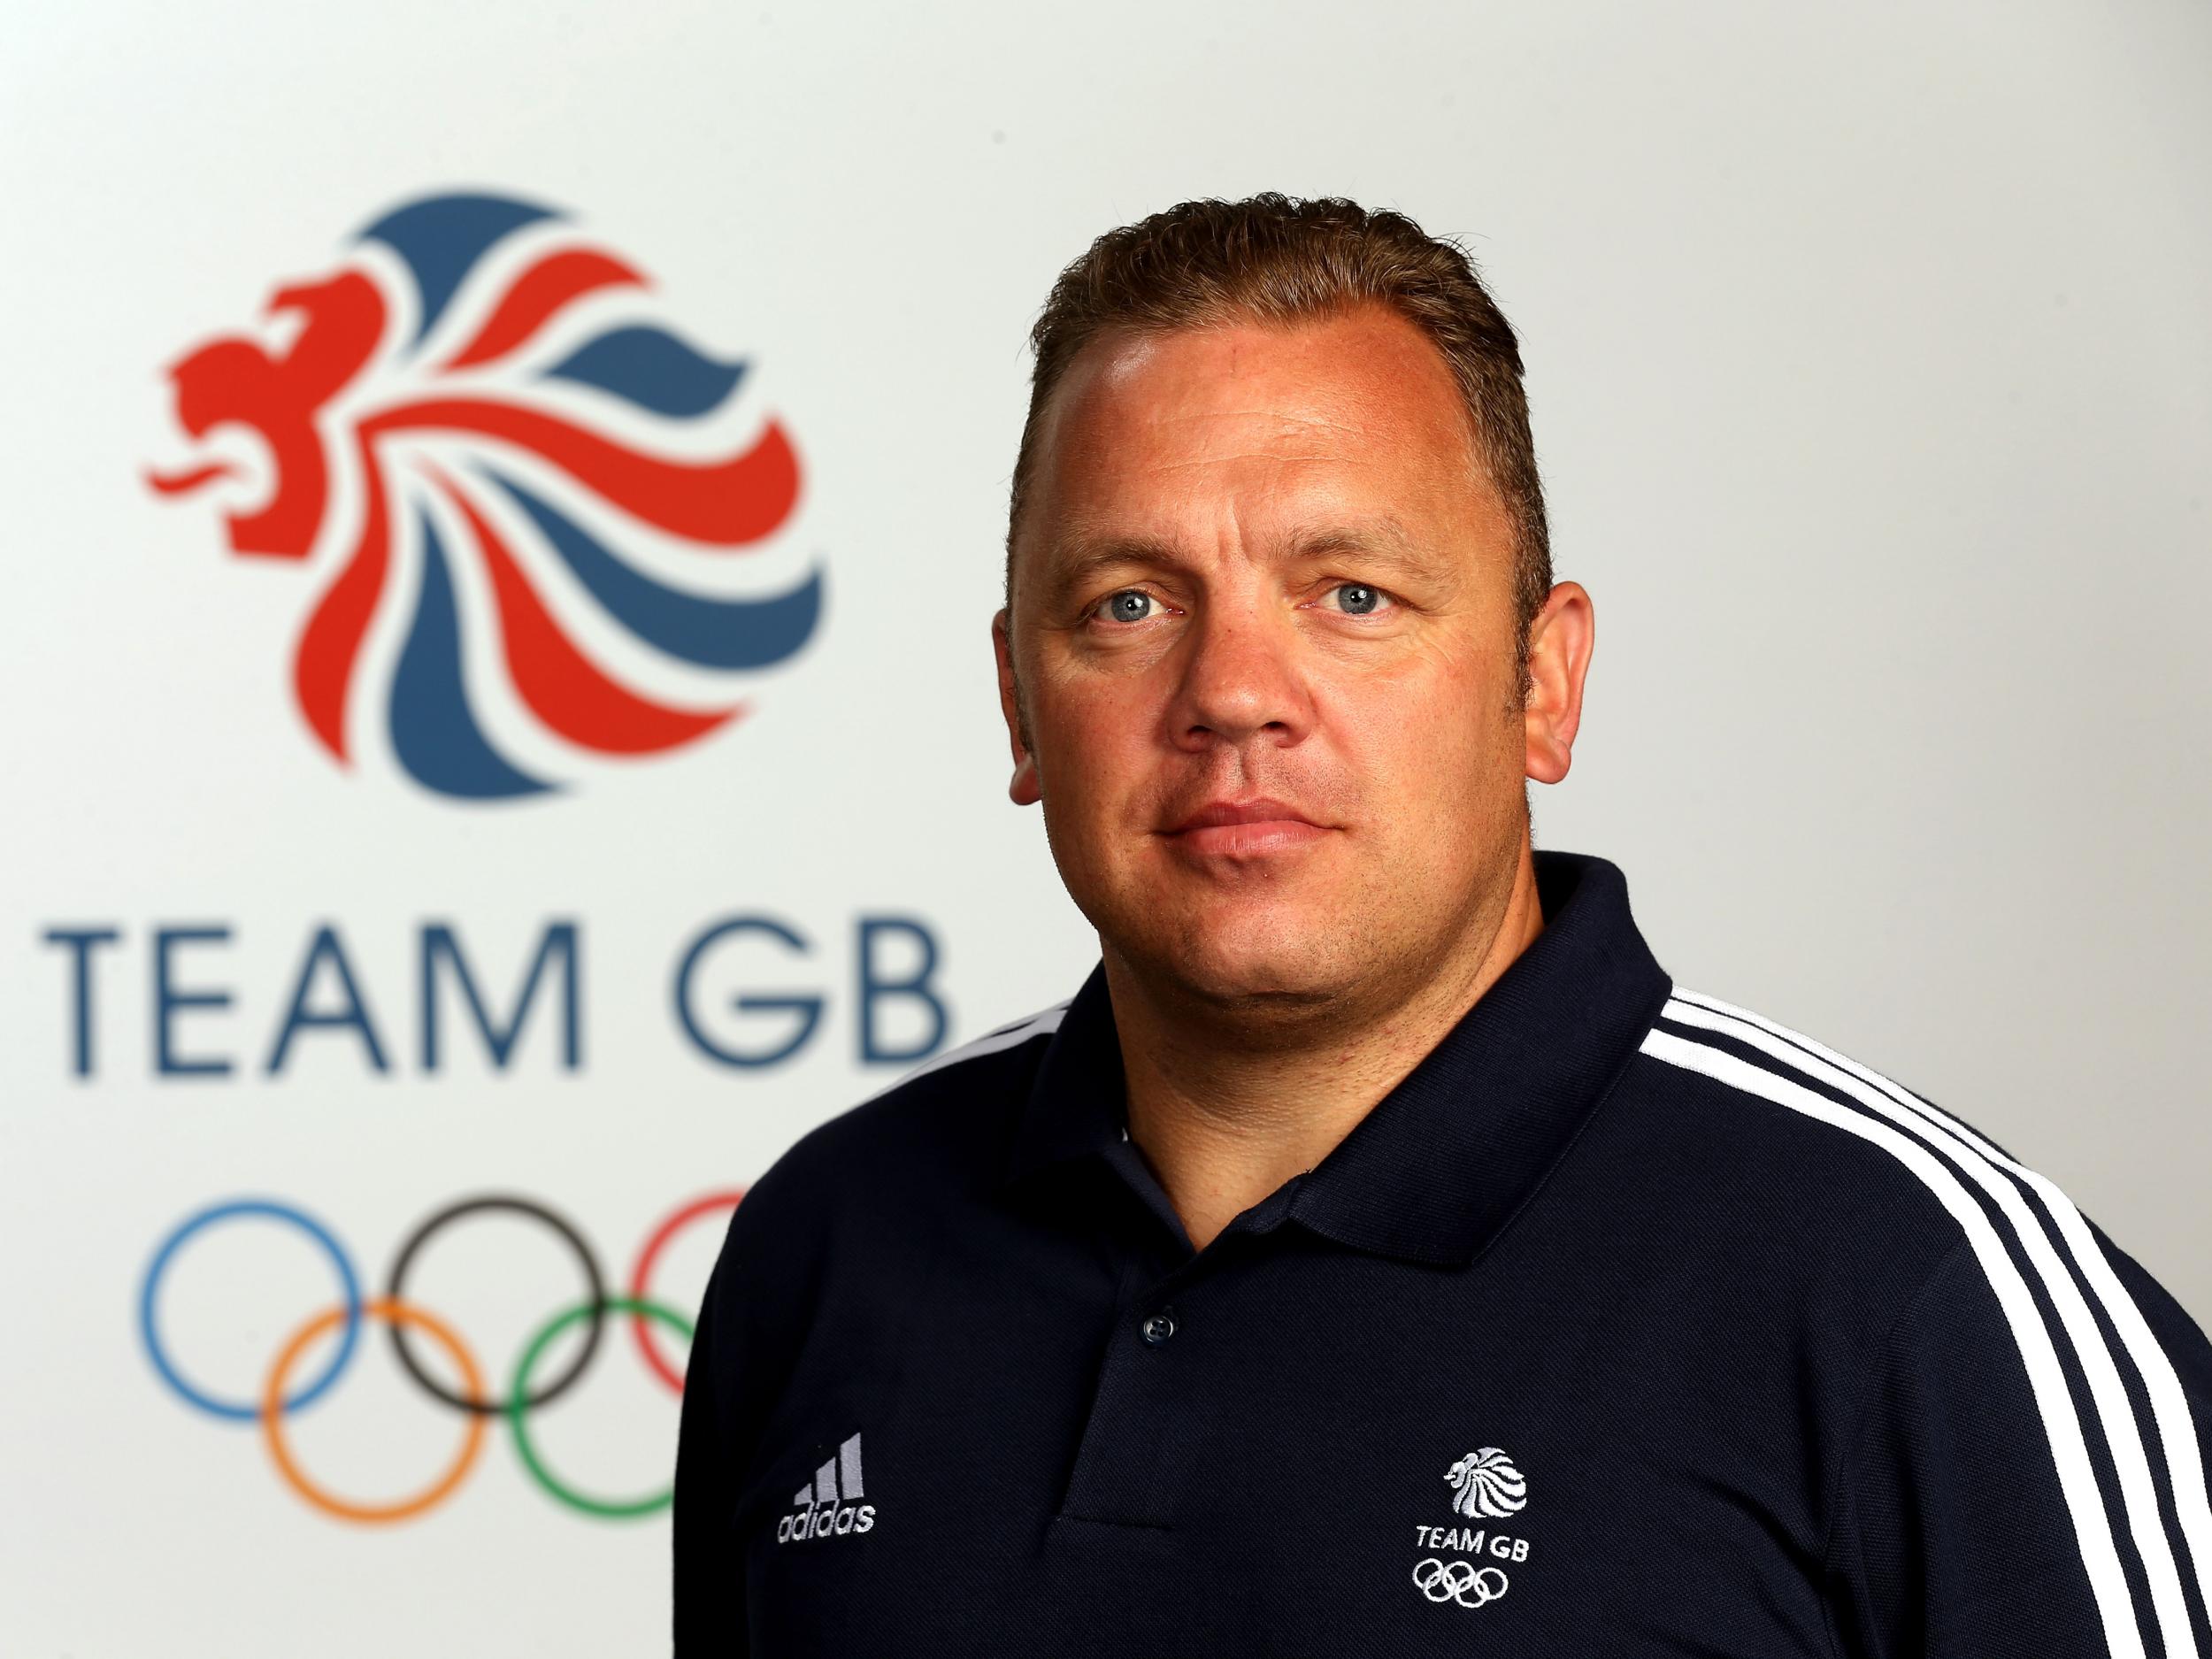 Lee Johnston represented Great Britain at three Olympics before being promoted to head coach last month